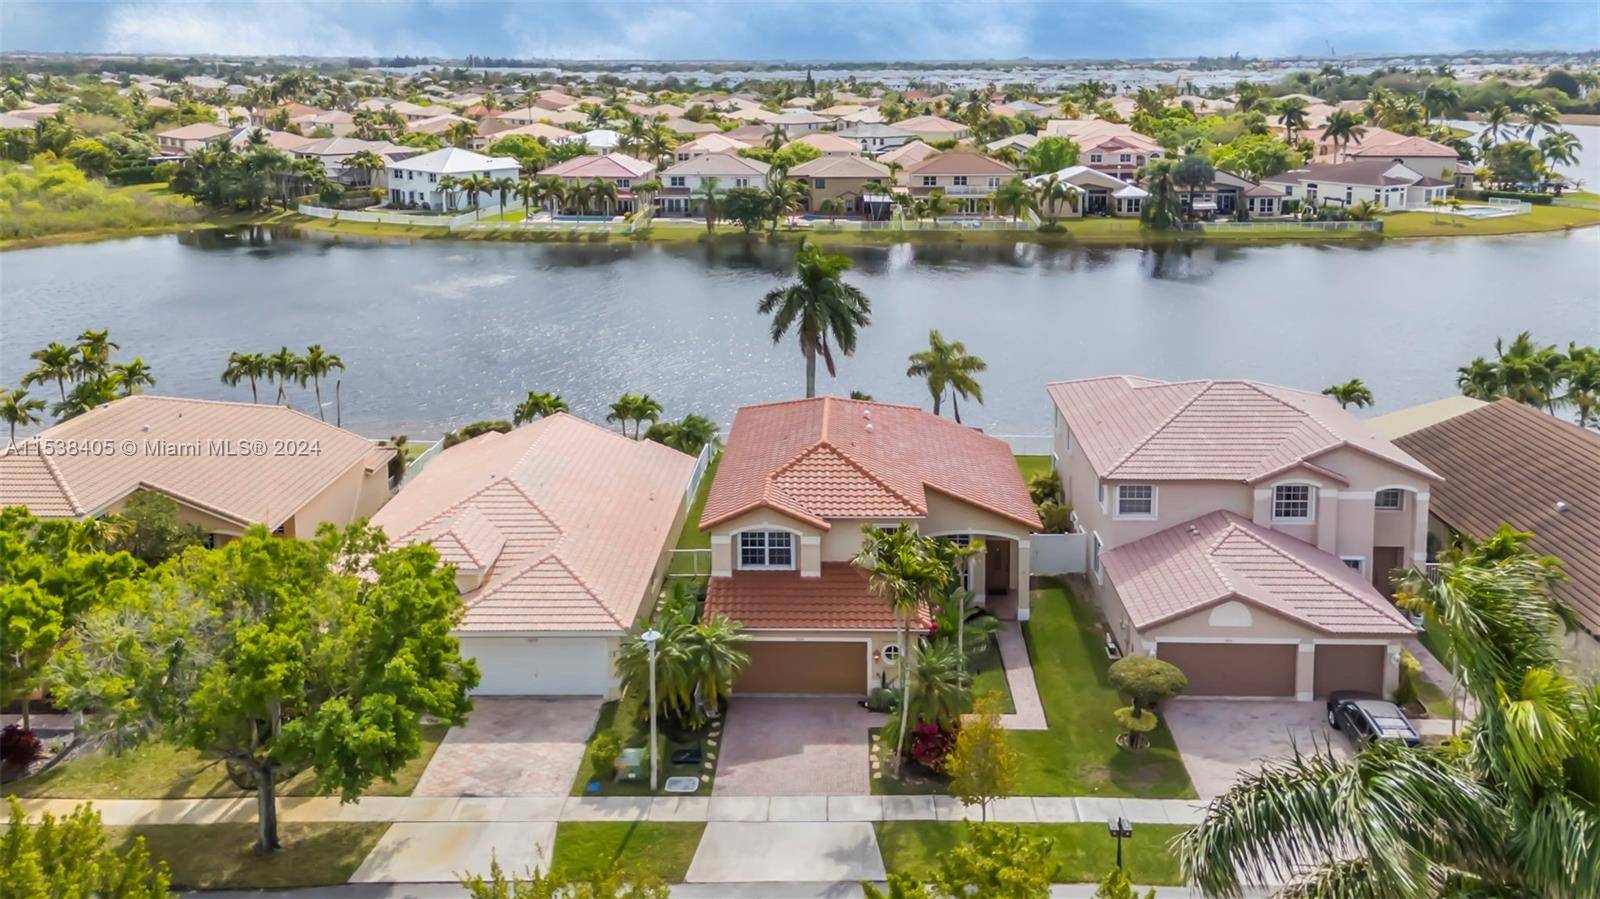 Gorgeous two story home on the lake with a pool, with four bedrooms and three full bathrooms, in the manned guard gated community of Silver Lakes.